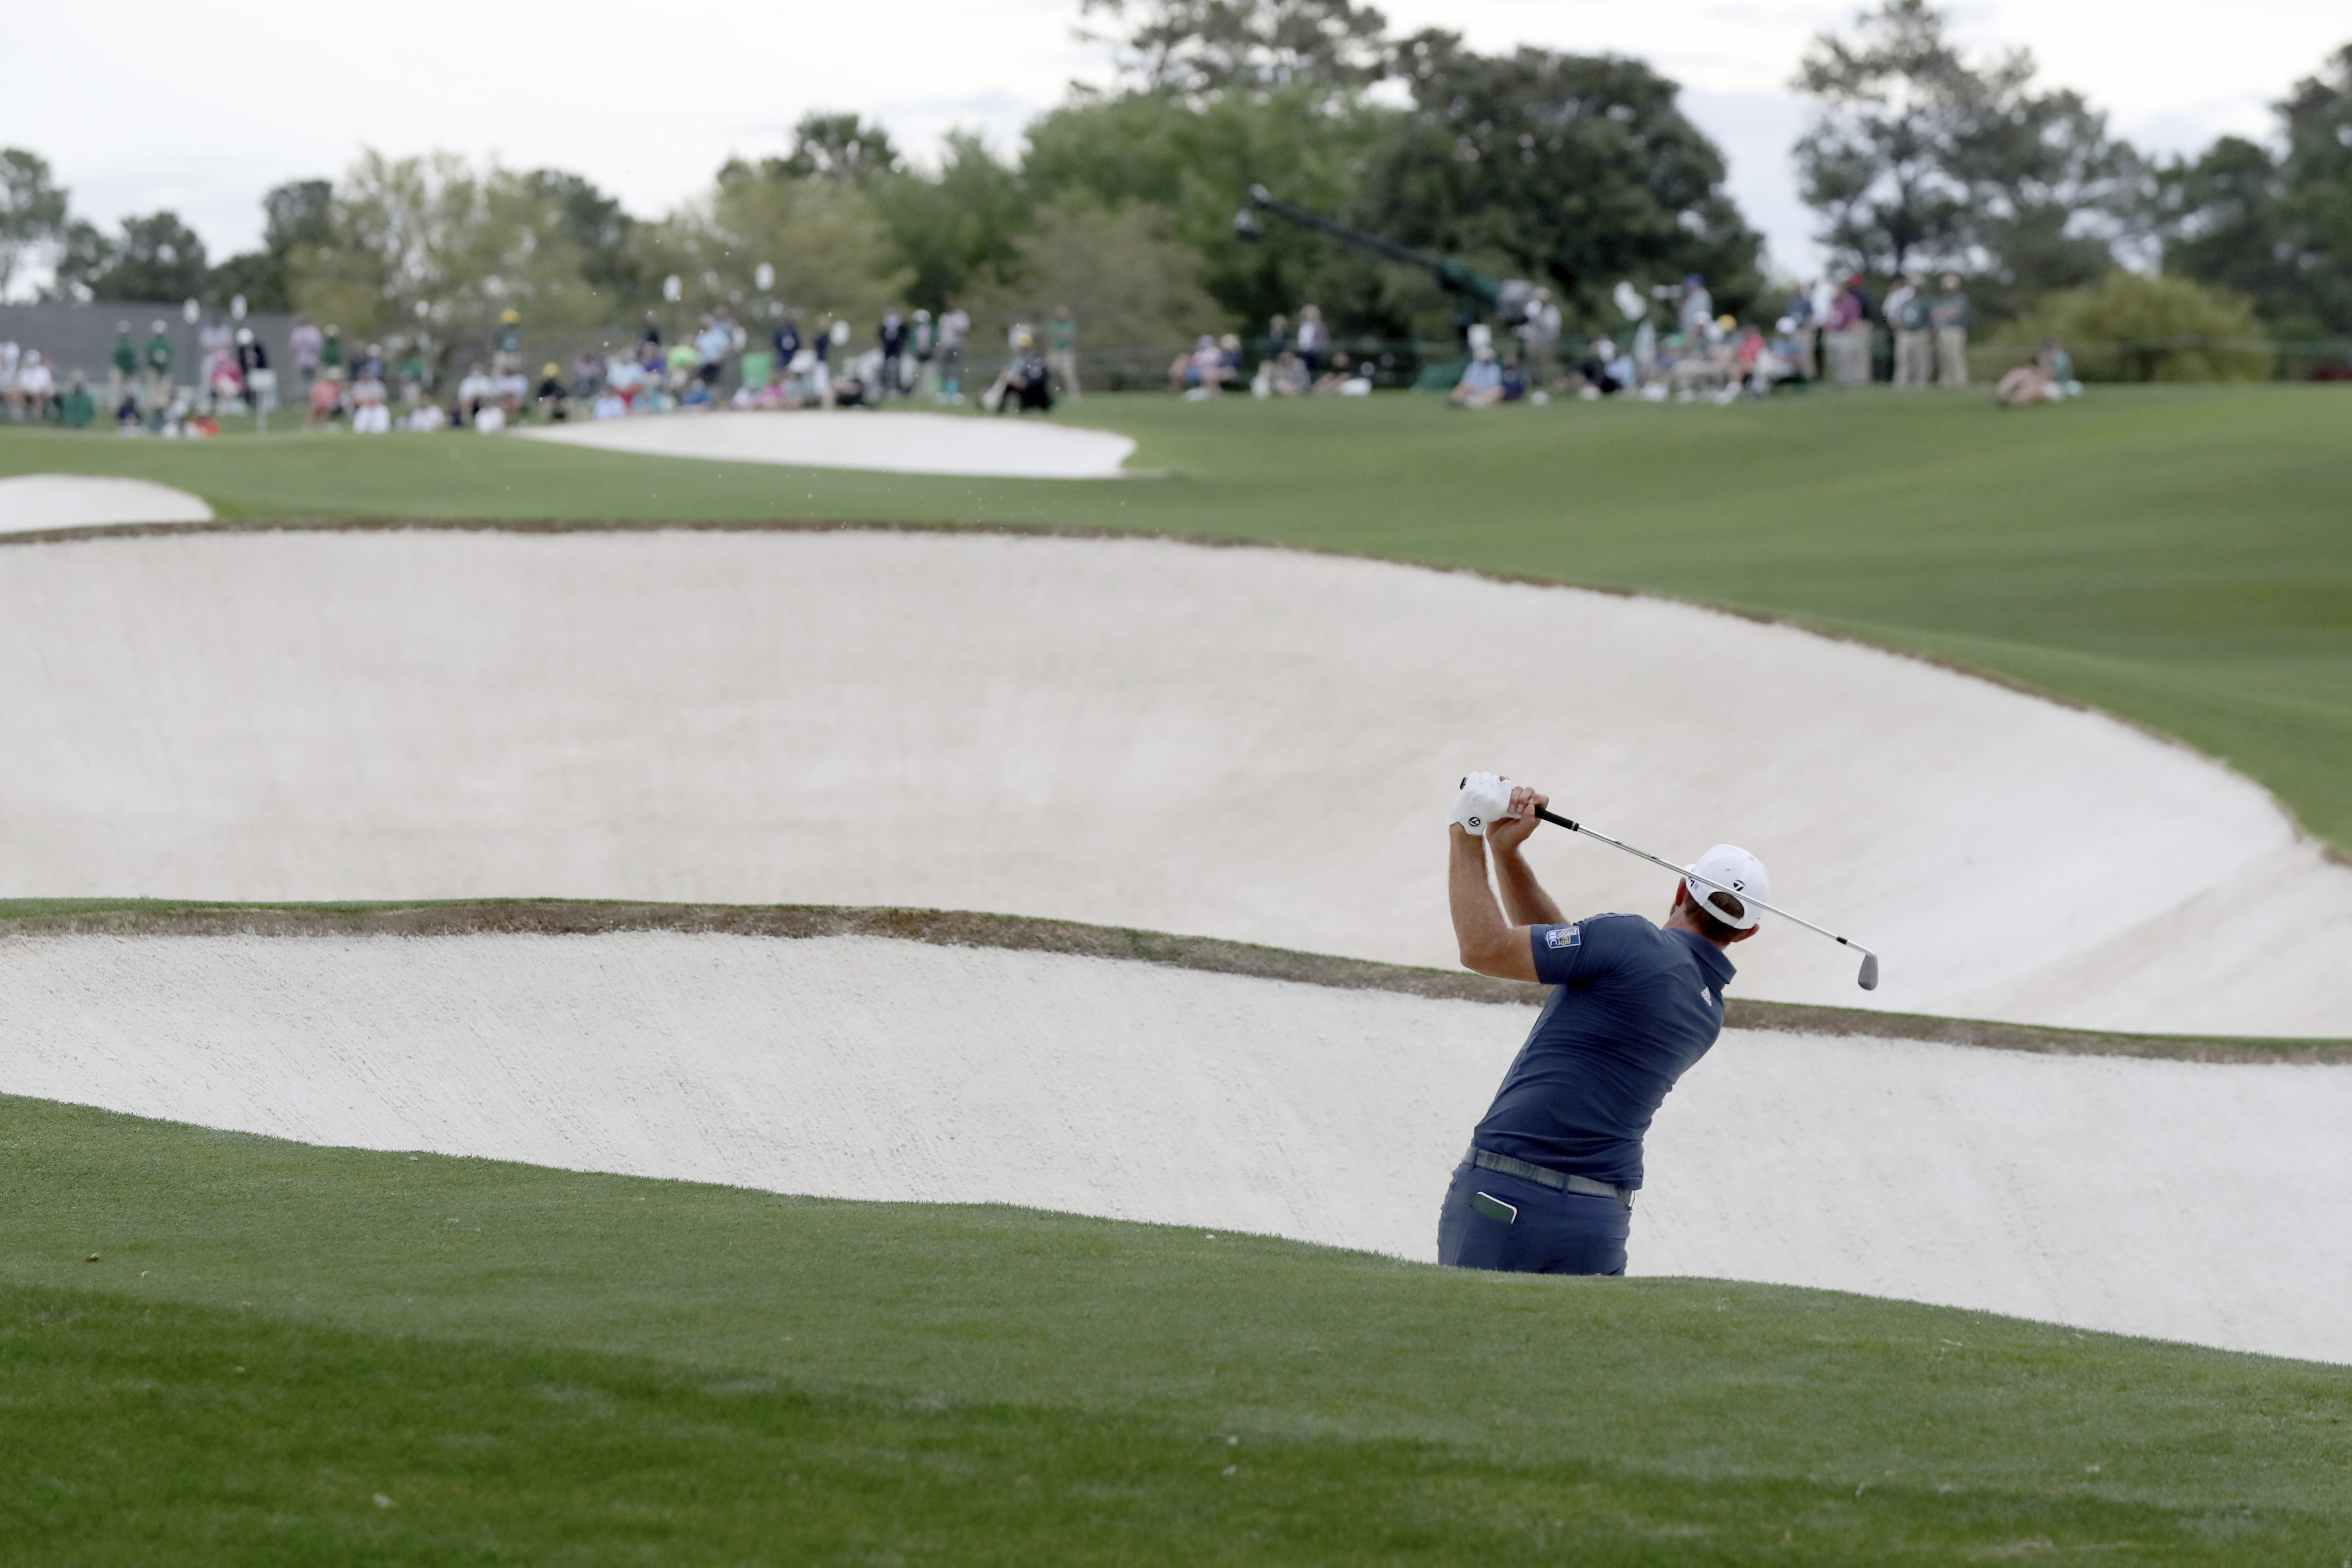 Dustin Johnson hits out of a bunker on the 18th hole during the second round of the 2021 Masters at Augusta National. Photo: AP